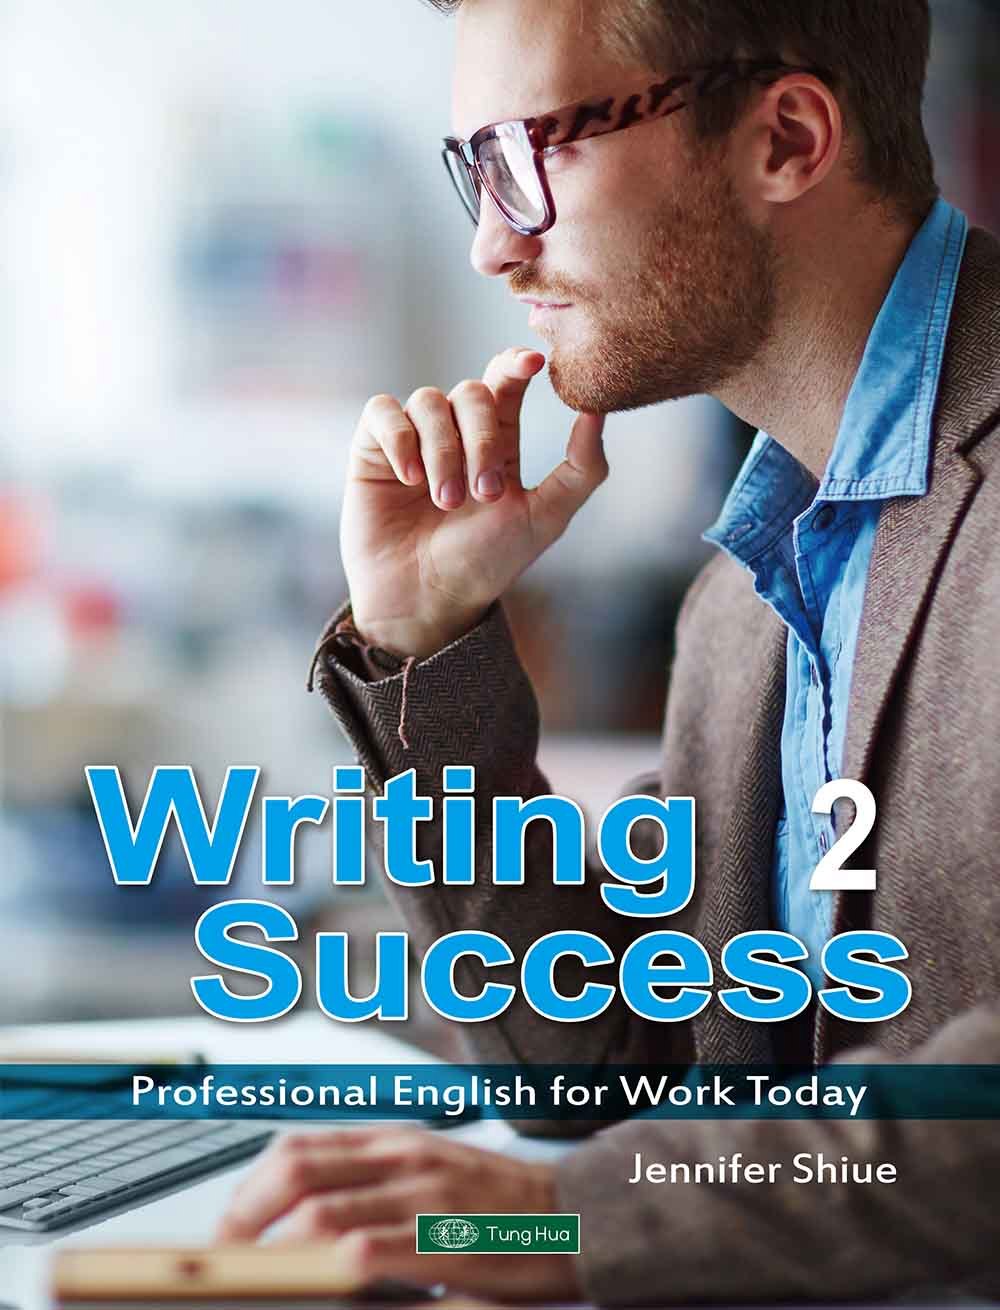 Writing Success 2：Professional English for Work Today